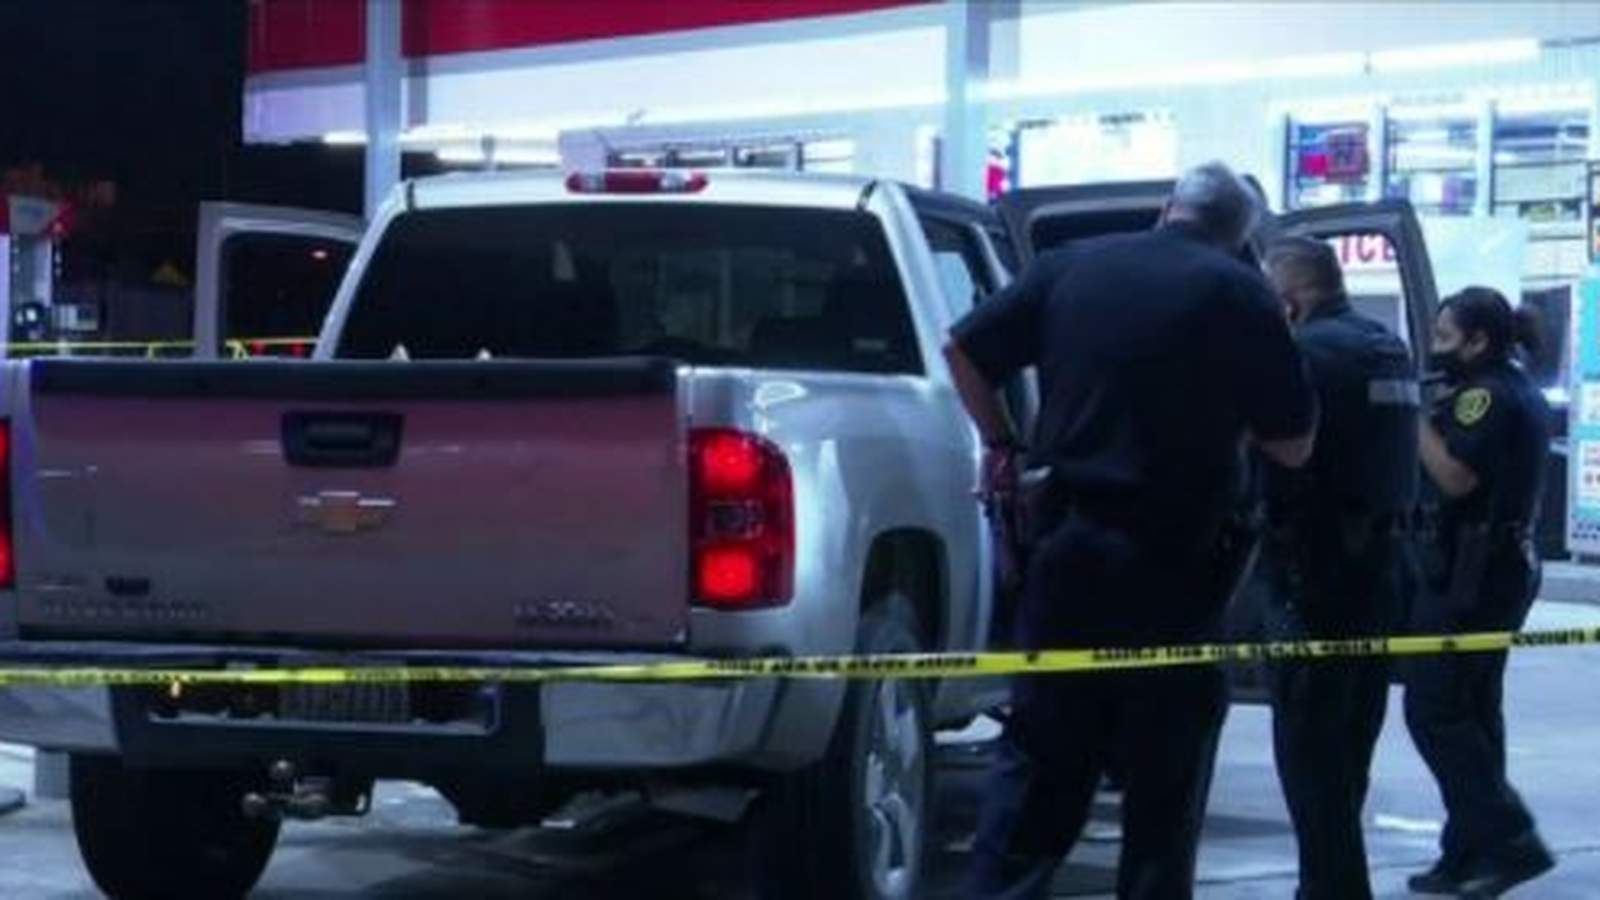 Man found shot to death at gas station in southeast Houston, police say